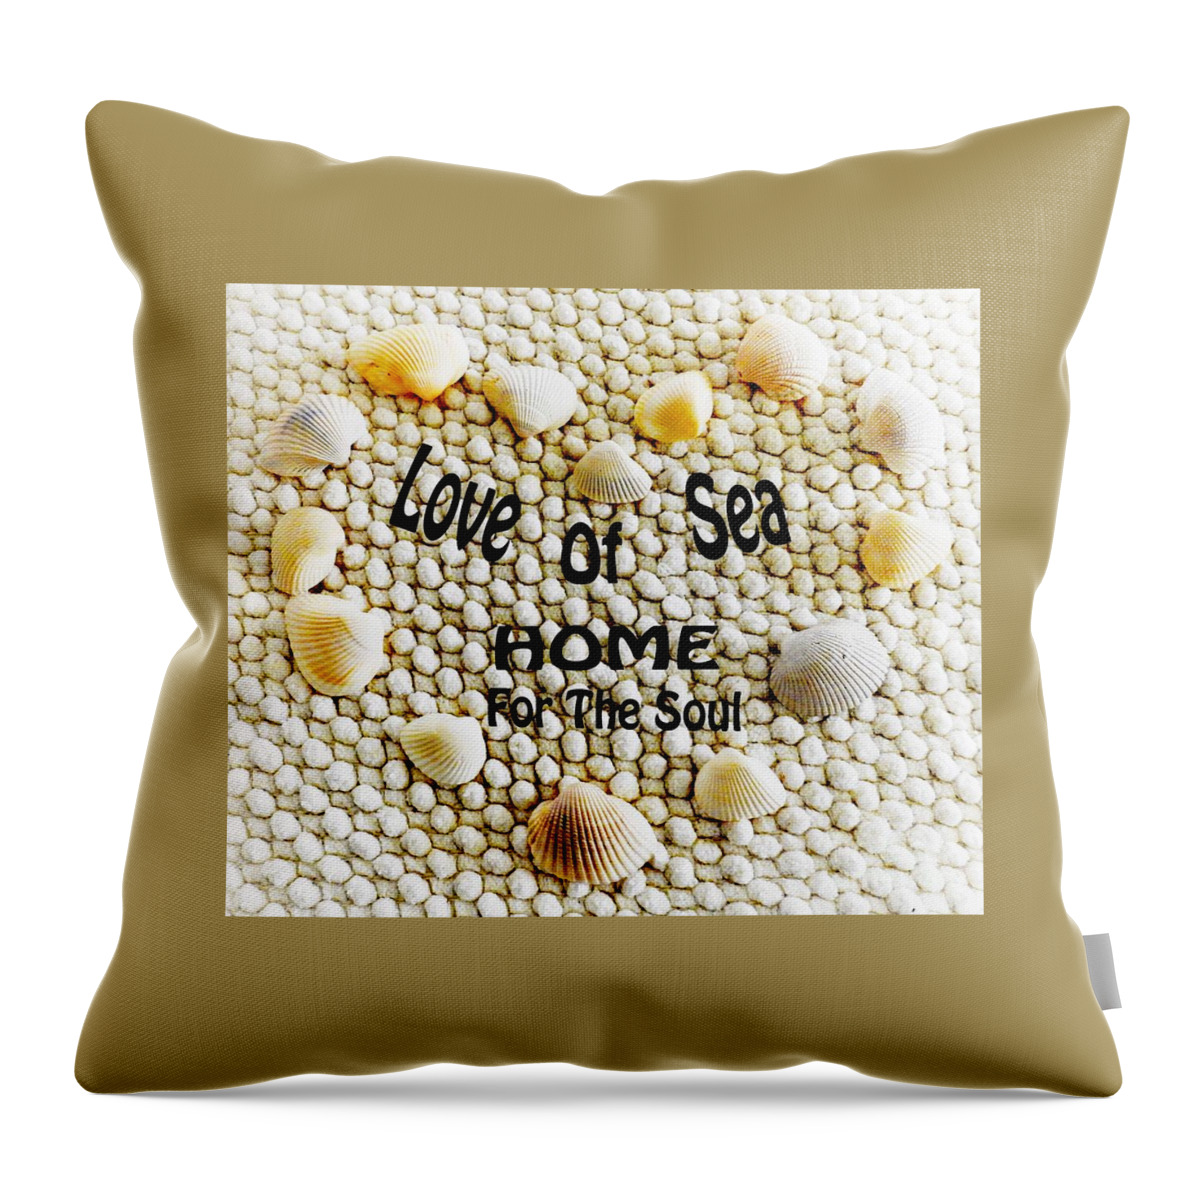 Sea Throw Pillow featuring the photograph Love Of Sea by Jan Gelders